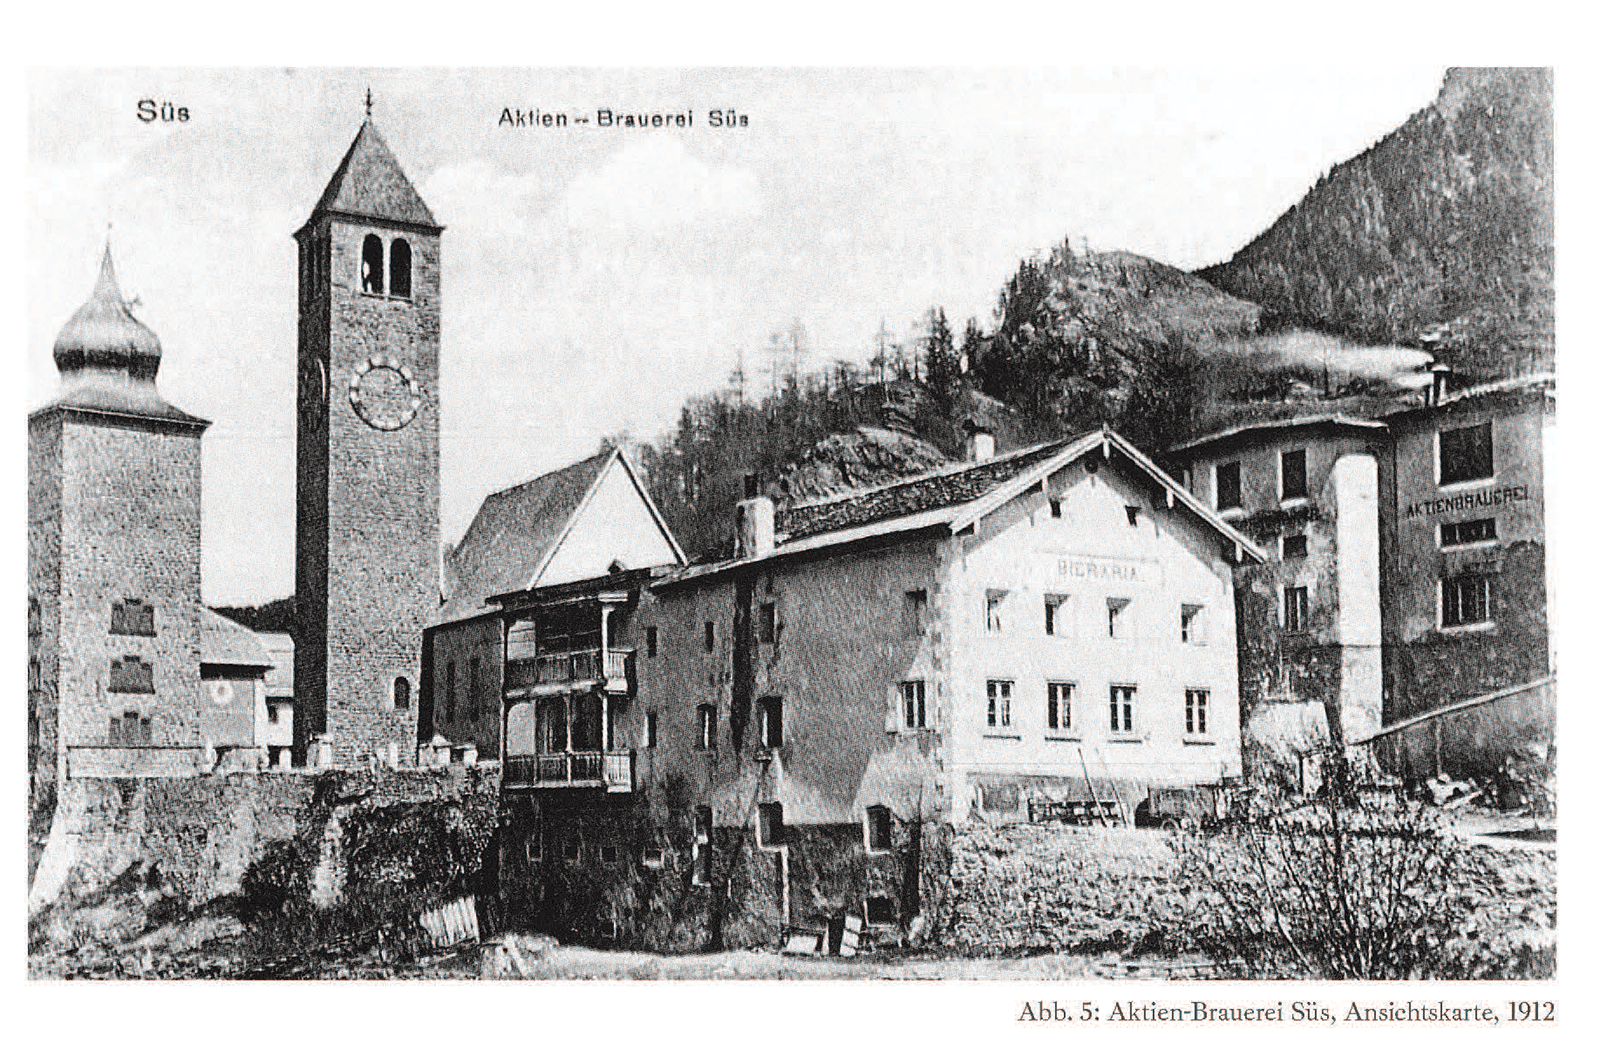 Süs Brewery: View map, 1912. Courtesy of Gammeter Media SA, 2021, San Muerzzan/ Scuol